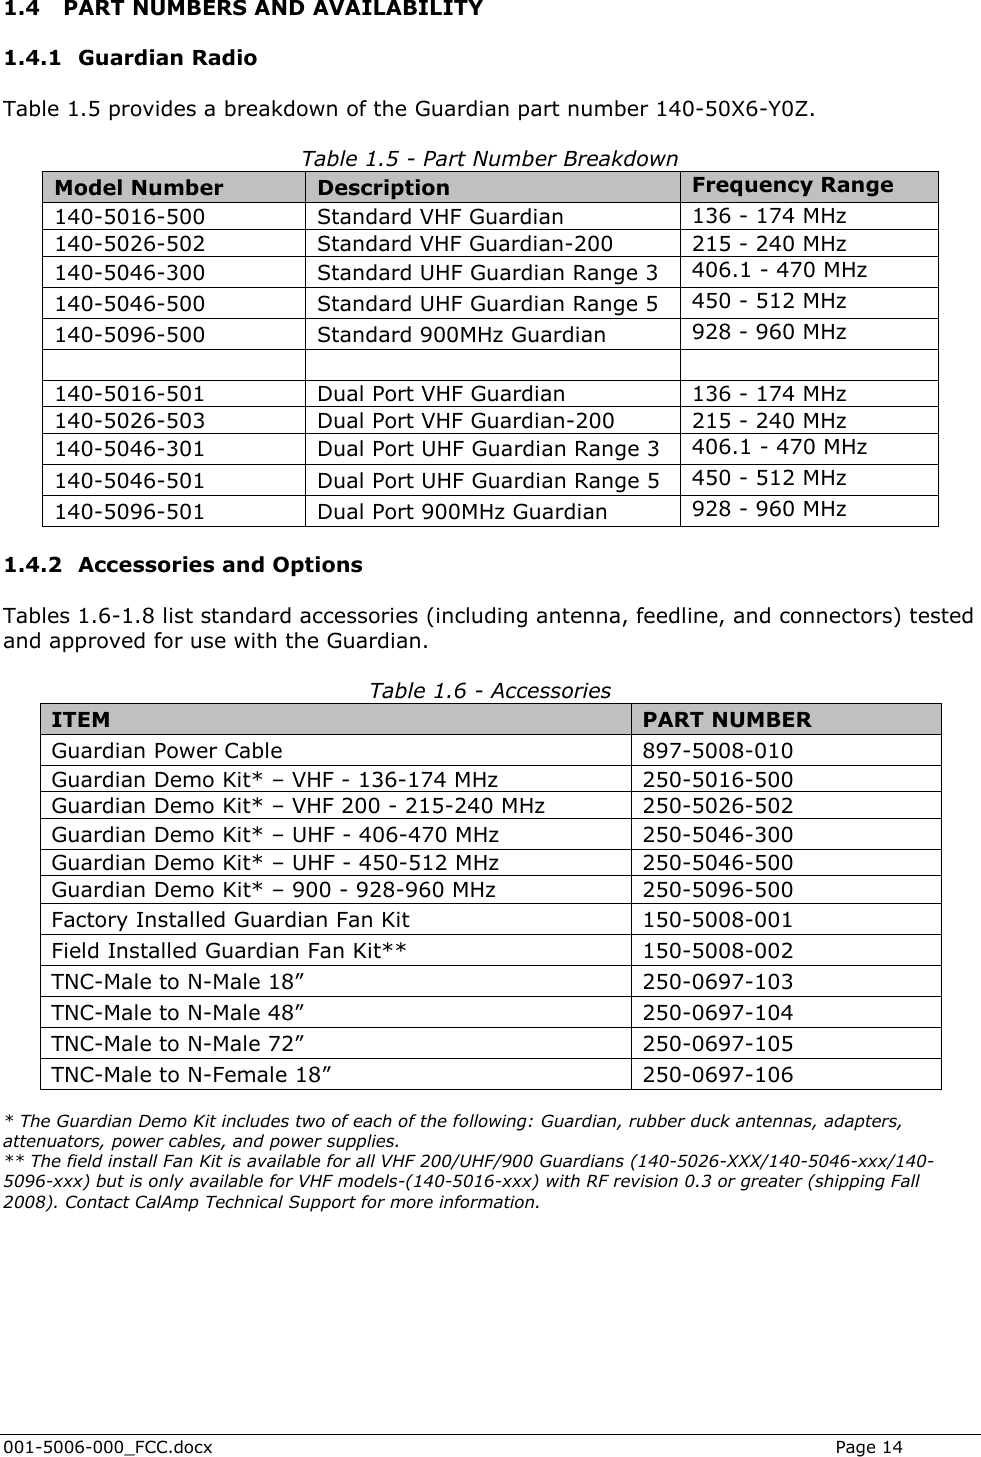  001-5006-000_FCC.docx    Page 14 1.4 PART NUMBERS AND AVAILABILITY 1.4.1 Guardian Radio Table 1.5 provides a breakdown of the Guardian part number 140-50X6-Y0Z.  Table 1.5 - Part Number Breakdown Model Number Description Frequency Range 140-5016-500 Standard VHF Guardian 136 - 174 MHz 140-5026-502 Standard VHF Guardian-200 215 - 240 MHz 140-5046-300 Standard UHF Guardian Range 3 406.1 - 470 MHz 140-5046-500 Standard UHF Guardian Range 5 450 - 512 MHz 140-5096-500 Standard 900MHz Guardian 928 - 960 MHz    140-5016-501 Dual Port VHF Guardian 136 - 174 MHz 140-5026-503 Dual Port VHF Guardian-200 215 - 240 MHz 140-5046-301 Dual Port UHF Guardian Range 3 406.1 - 470 MHz 140-5046-501 Dual Port UHF Guardian Range 5 450 - 512 MHz 140-5096-501 Dual Port 900MHz Guardian 928 - 960 MHz 1.4.2 Accessories and Options Tables 1.6-1.8 list standard accessories (including antenna, feedline, and connectors) tested and approved for use with the Guardian. Table 1.6 - Accessories ITEM PART NUMBER Guardian Power Cable 897-5008-010  Guardian Demo Kit* – VHF - 136-174 MHz 250-5016-500 Guardian Demo Kit* – VHF 200 - 215-240 MHz 250-5026-502 Guardian Demo Kit* – UHF - 406-470 MHz 250-5046-300 Guardian Demo Kit* – UHF - 450-512 MHz 250-5046-500 Guardian Demo Kit* – 900 - 928-960 MHz 250-5096-500 Factory Installed Guardian Fan Kit 150-5008-001 Field Installed Guardian Fan Kit** 150-5008-002 TNC-Male to N-Male 18” 250-0697-103 TNC-Male to N-Male 48” 250-0697-104 TNC-Male to N-Male 72” 250-0697-105 TNC-Male to N-Female 18” 250-0697-106  * The Guardian Demo Kit includes two of each of the following: Guardian, rubber duck antennas, adapters, attenuators, power cables, and power supplies. ** The field install Fan Kit is available for all VHF 200/UHF/900 Guardians (140-5026-XXX/140-5046-xxx/140-5096-xxx) but is only available for VHF models-(140-5016-xxx) with RF revision 0.3 or greater (shipping Fall 2008). Contact CalAmp Technical Support for more information.  